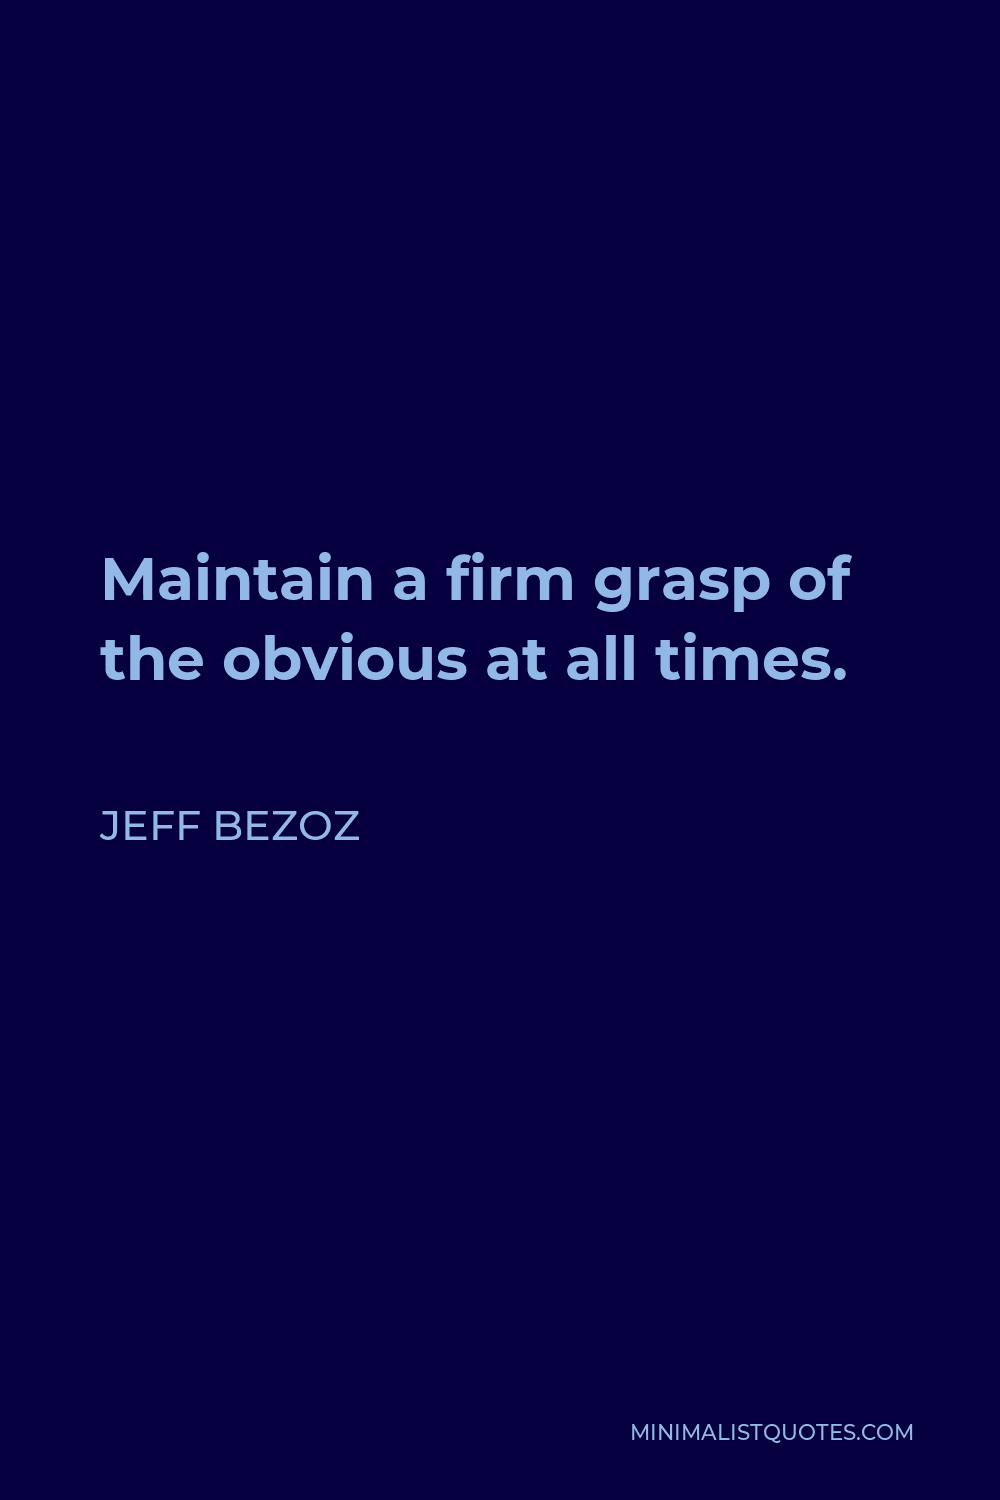 Jeff Bezoz Quote - Maintain a firm grasp of the obvious at all times.